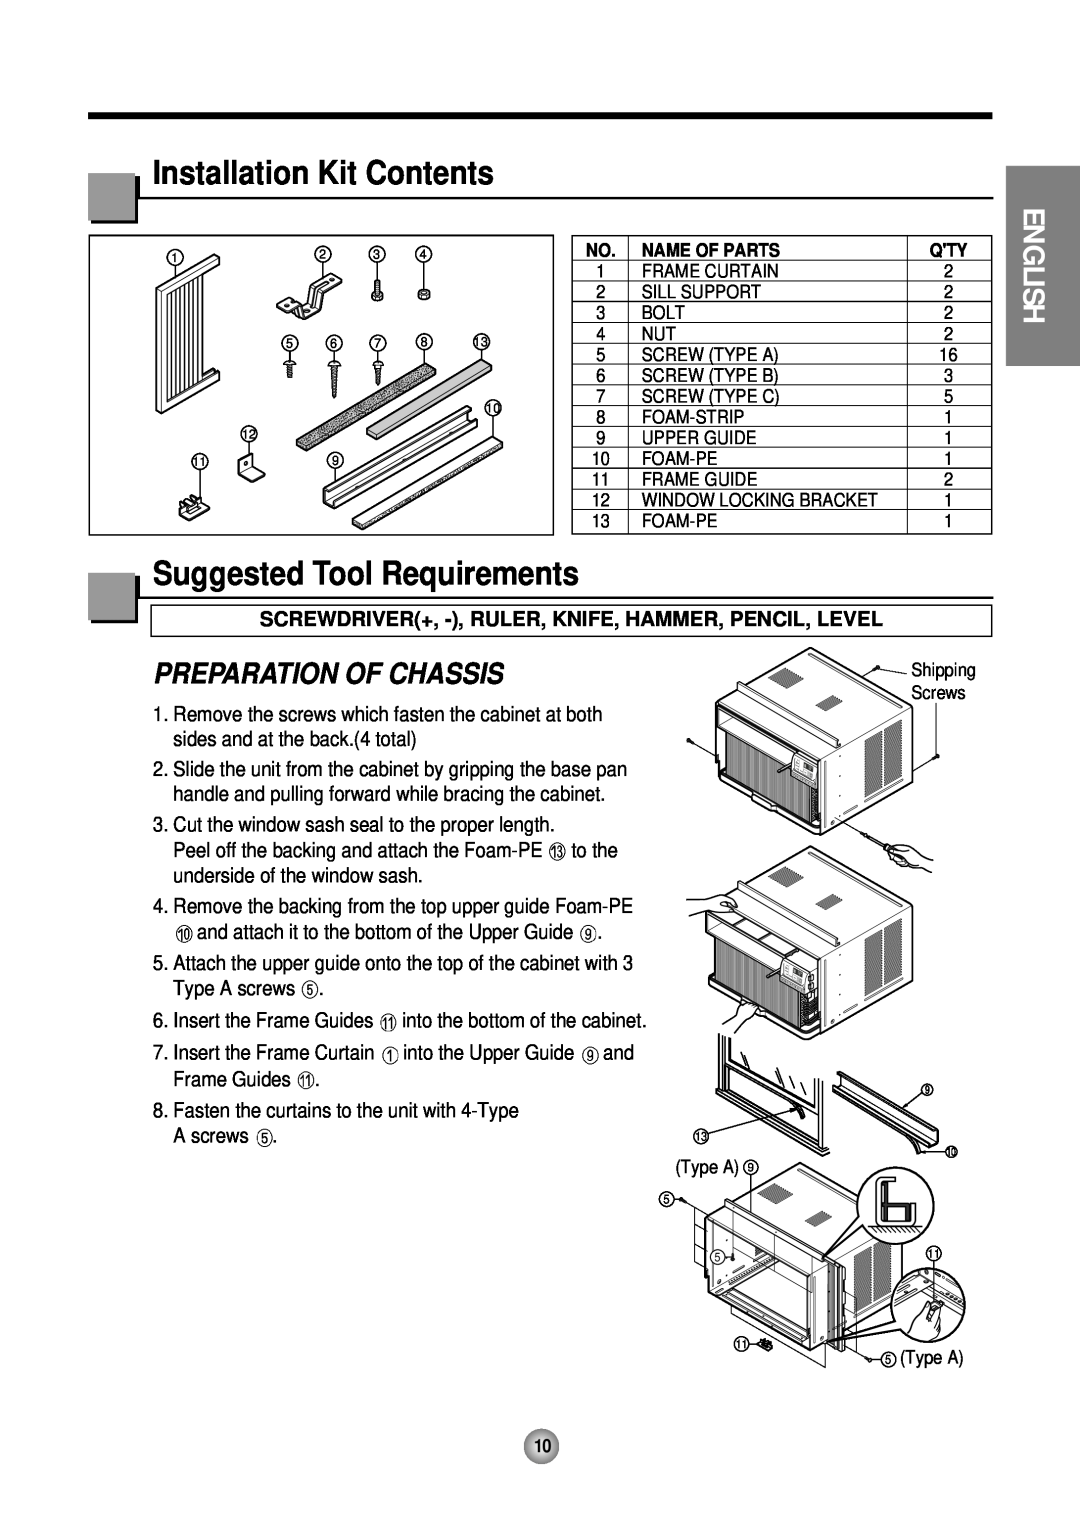 Friedrich CP12, CP10 Installation Kit Contents, Suggested Tool Requirements, Preparation Of Chassis, English 